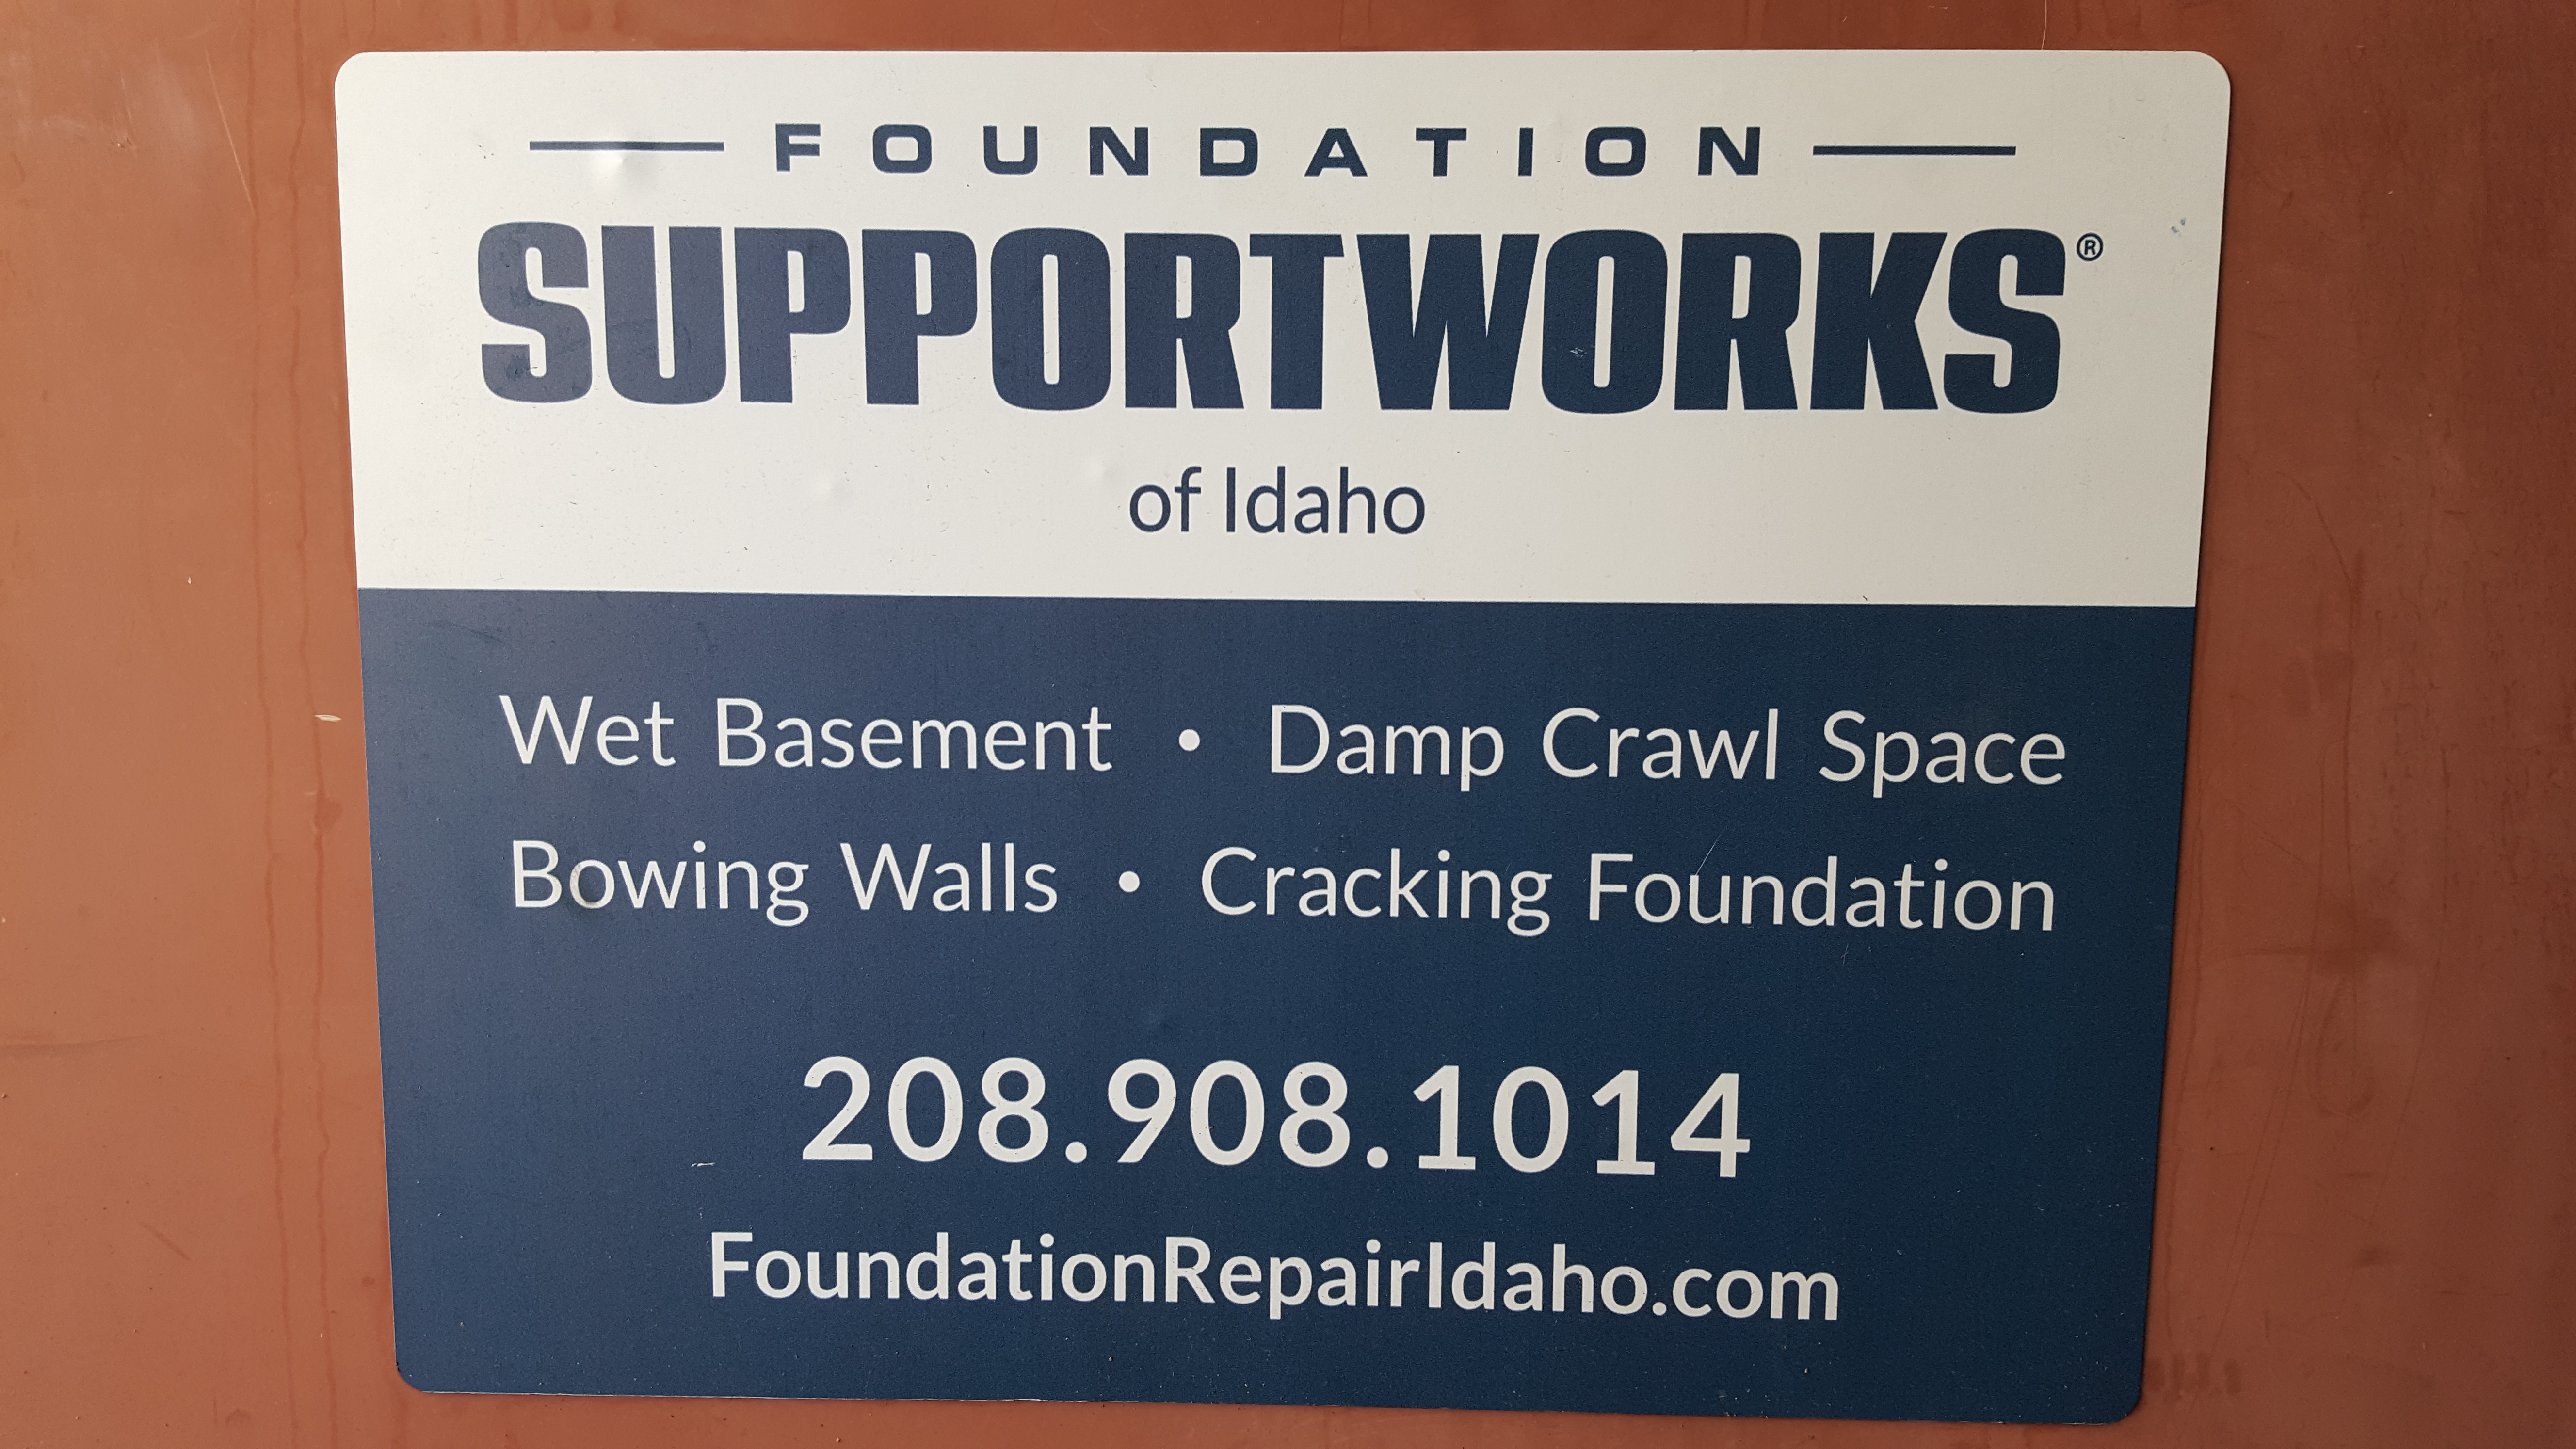 Rocky Mountain Remodeling, Inc. dba Foundation Supportworks of Idaho Logo